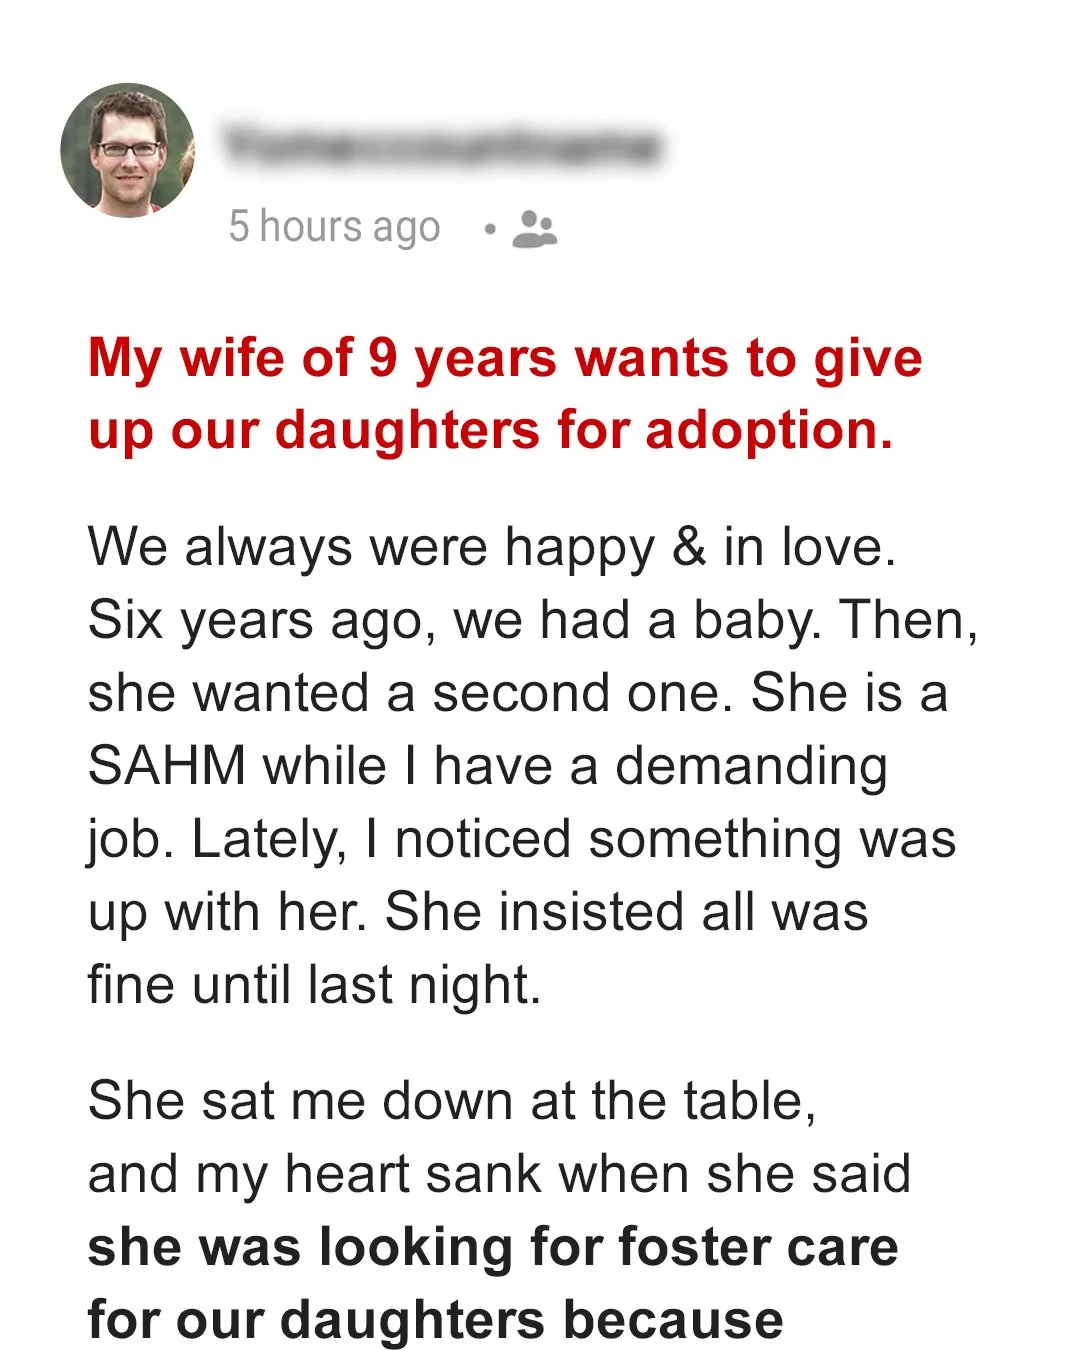 Wife Approaches Husband Of 9 Years Saying She’s Going To Give Their 2 